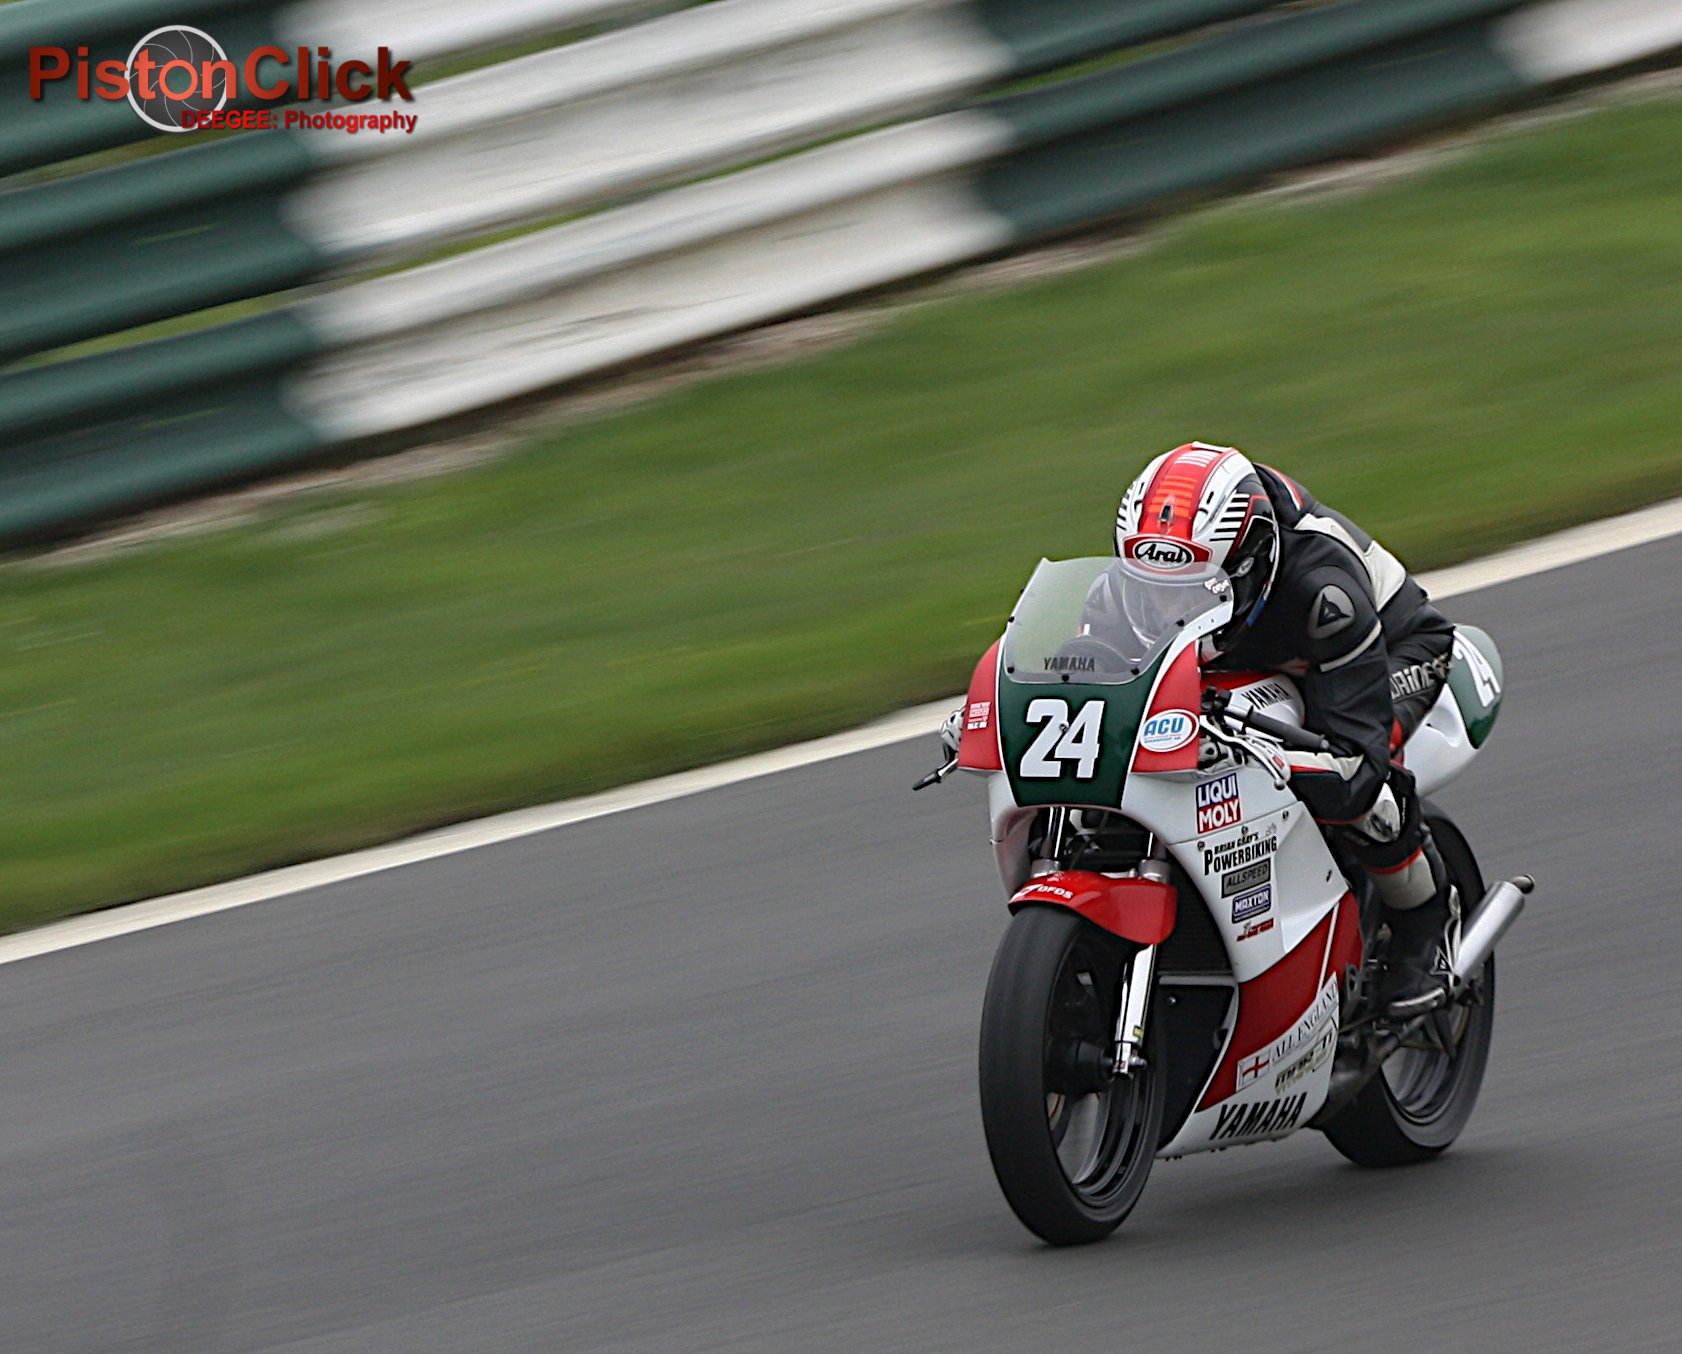 BMCRC Championship round from Cadwell Park